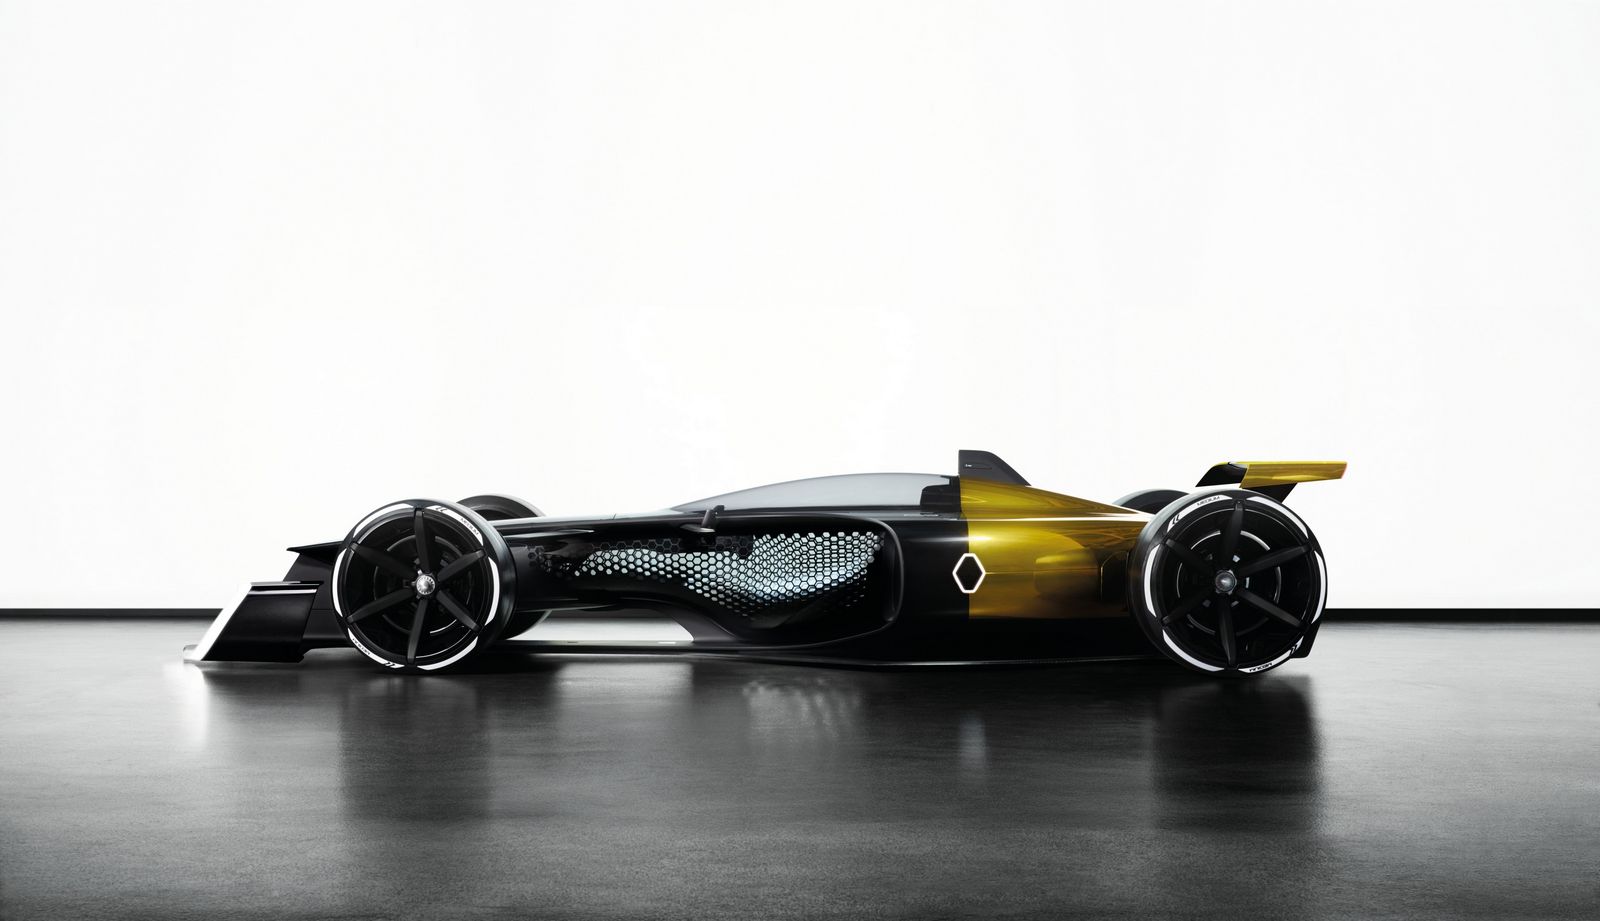 Renault RS 2027 Vision Concept, 2017